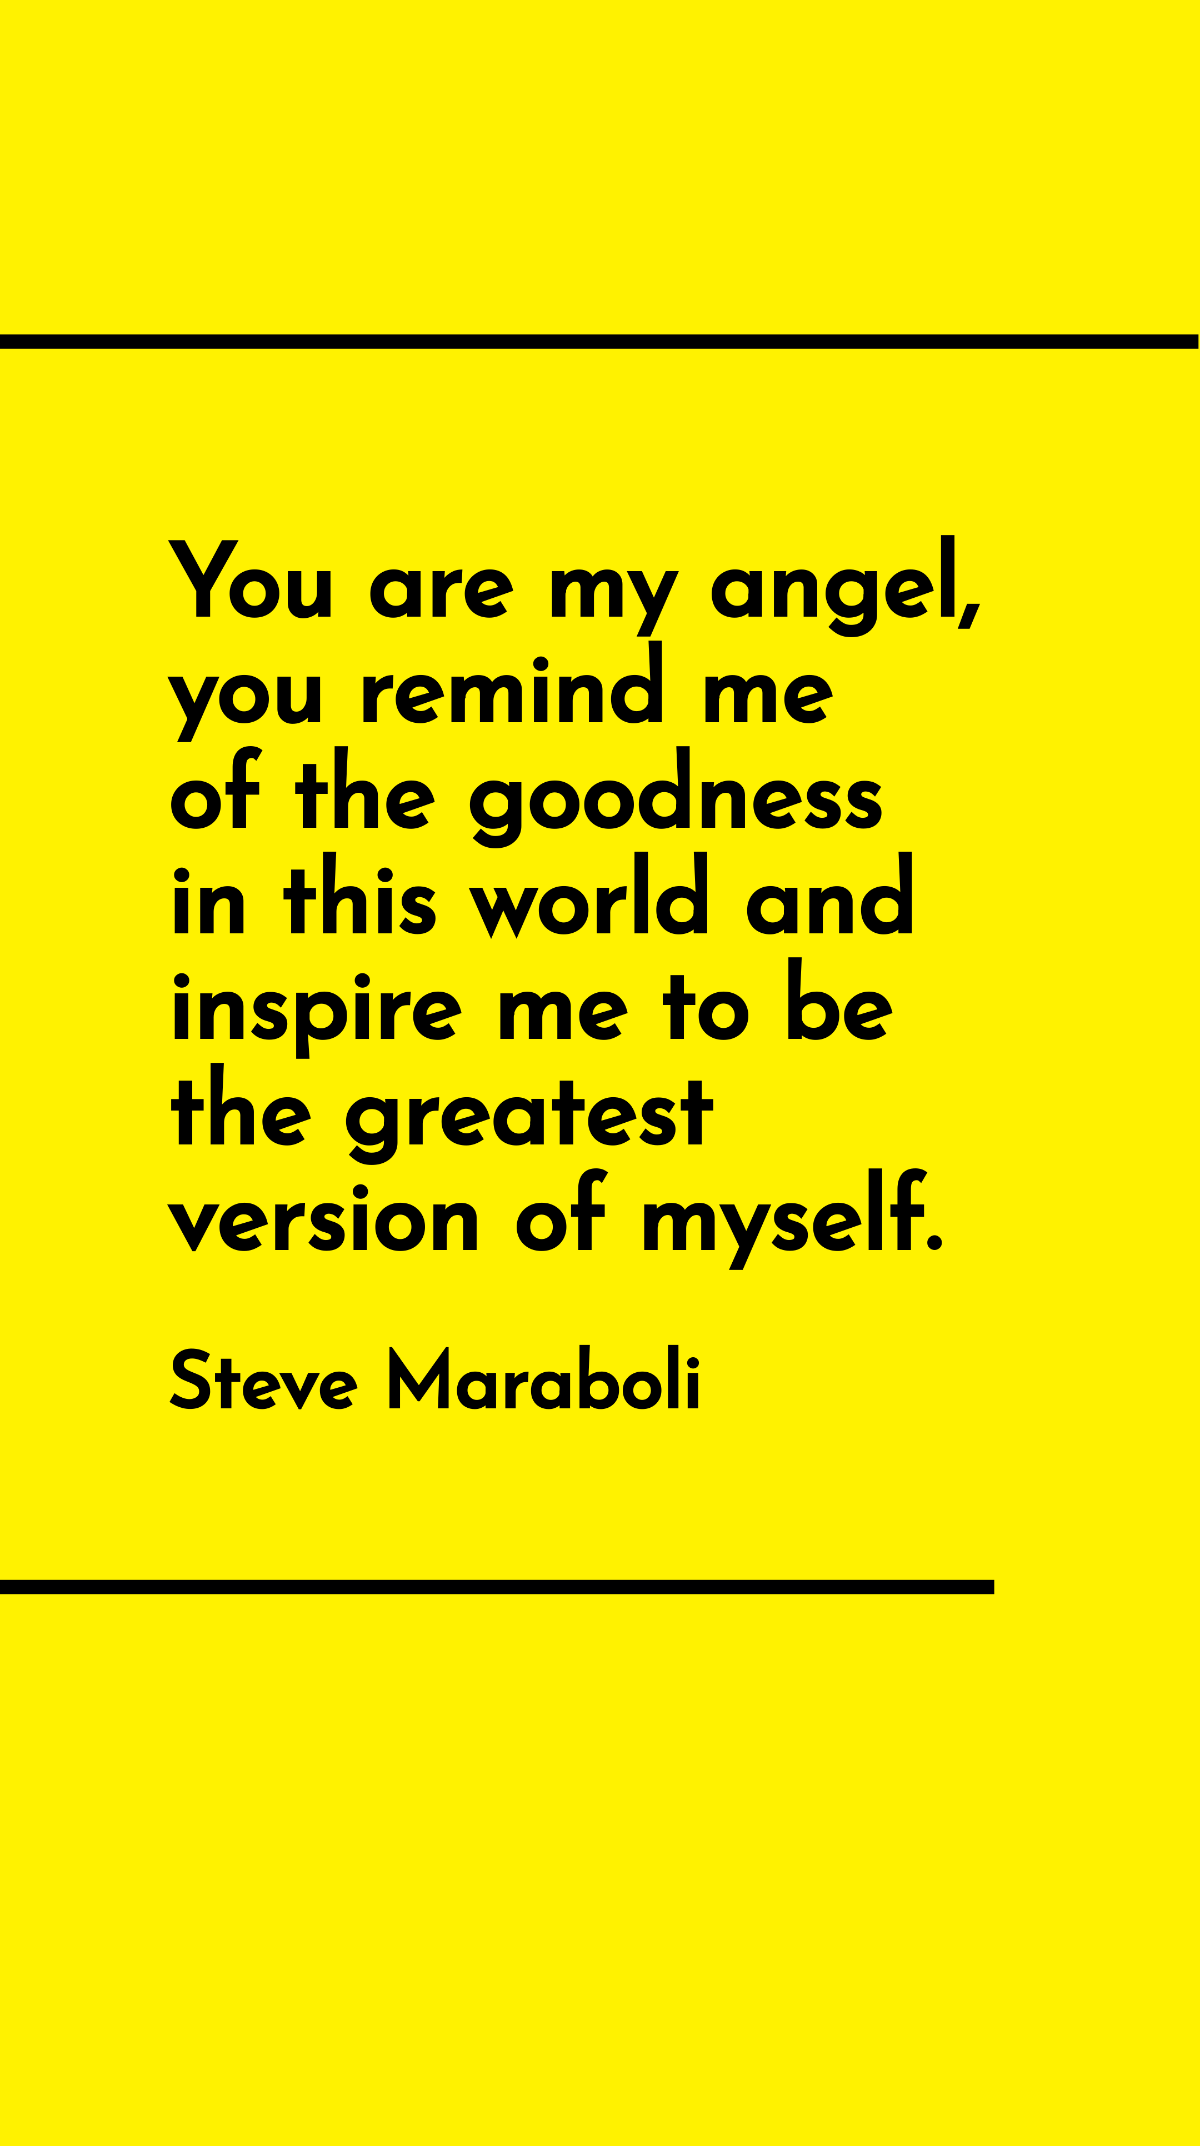 Steve Maraboli - You are my angel, you remind me of the goodness in this world and inspire me to be the greatest version of myself Template